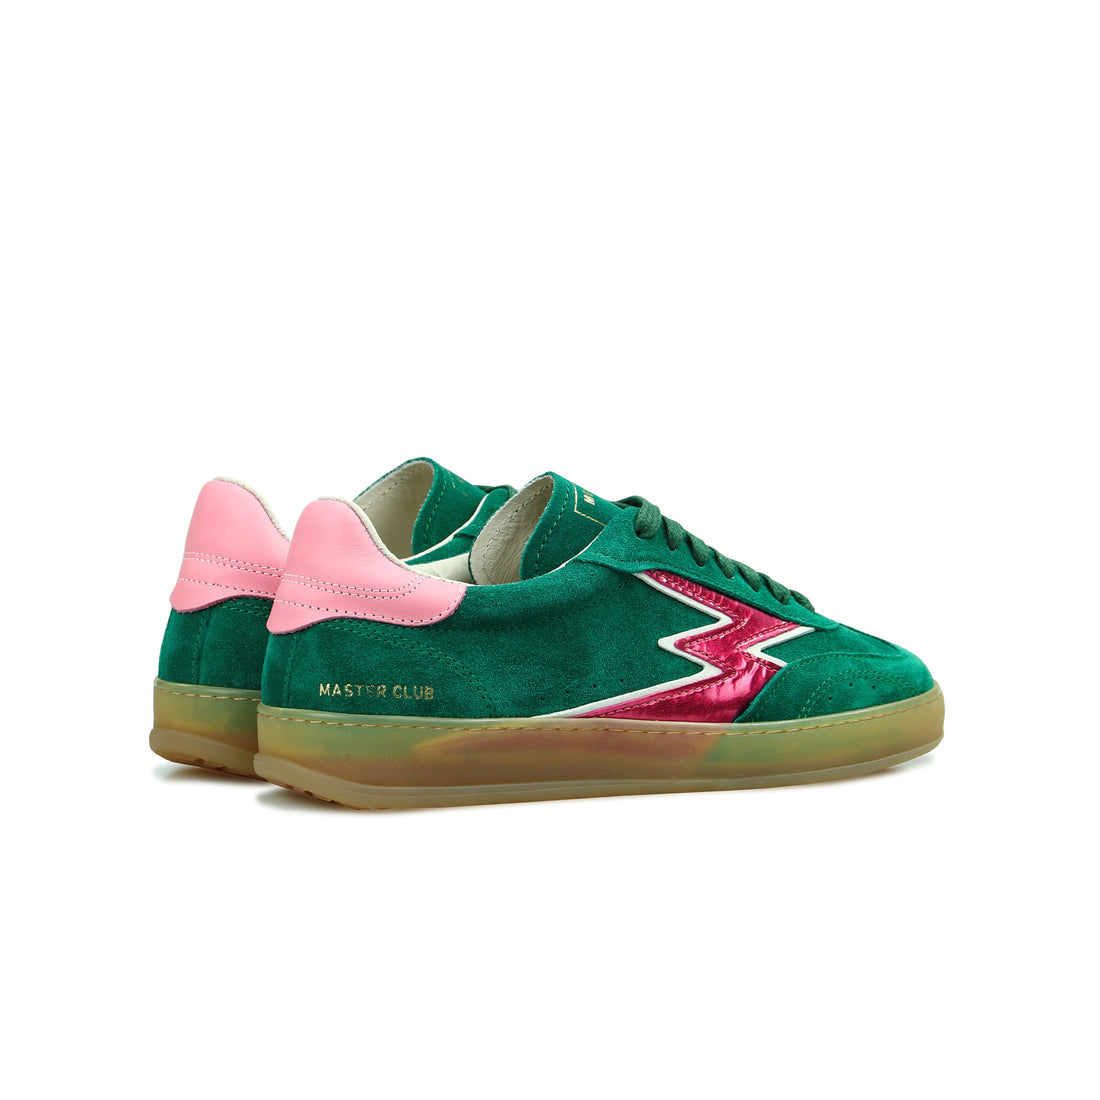 Green Club sneakers with pink details